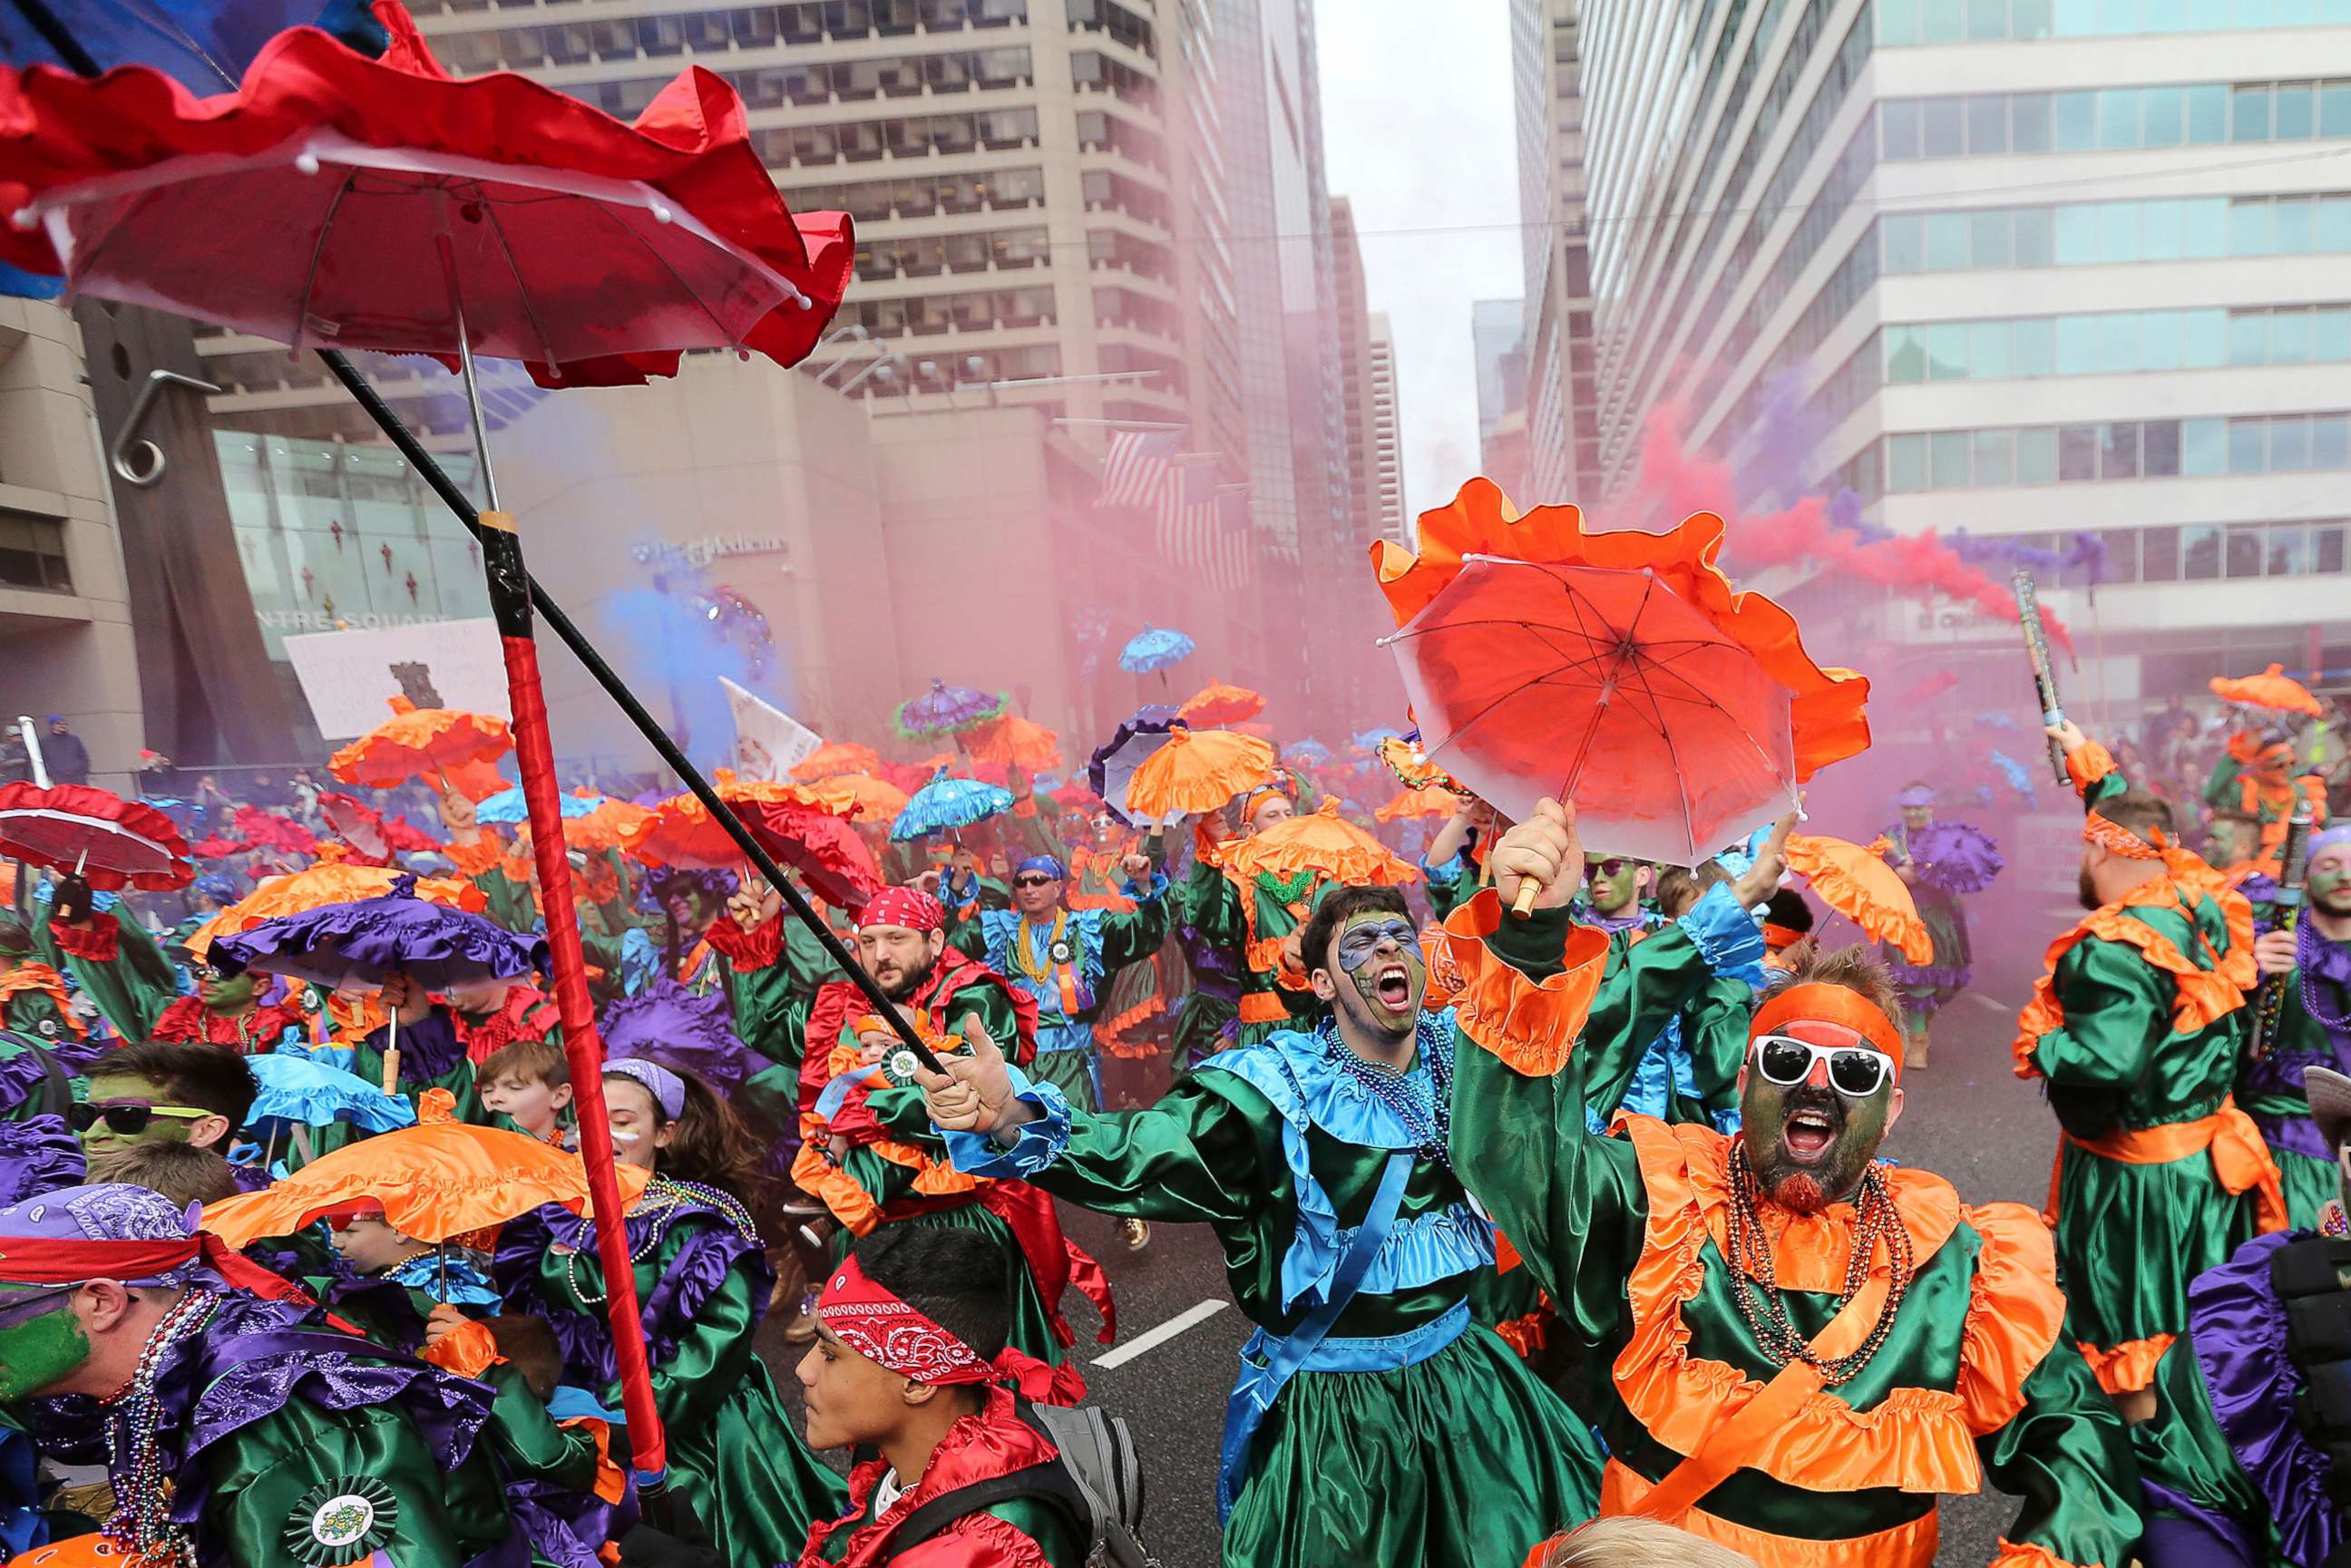 Marchers in Philadelphia's Mummers Parade accused of wearing blackface